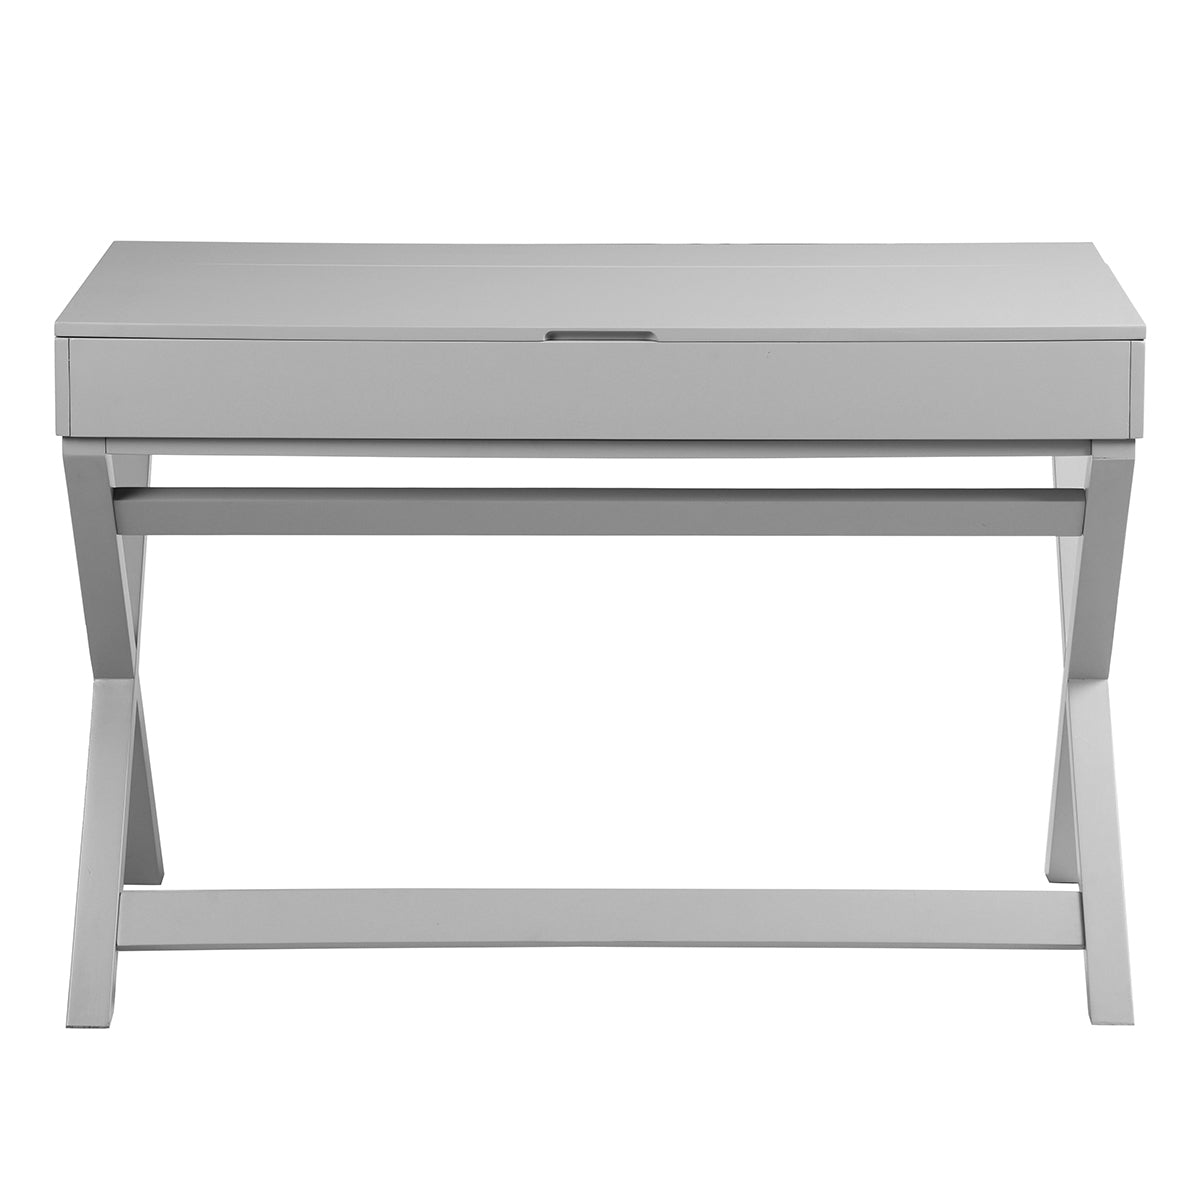 Lift Desk with 2 Drawer Storage, Computer Desk with Lift Table Top, Adjustable Height Table for Home Office, Living Room,grey